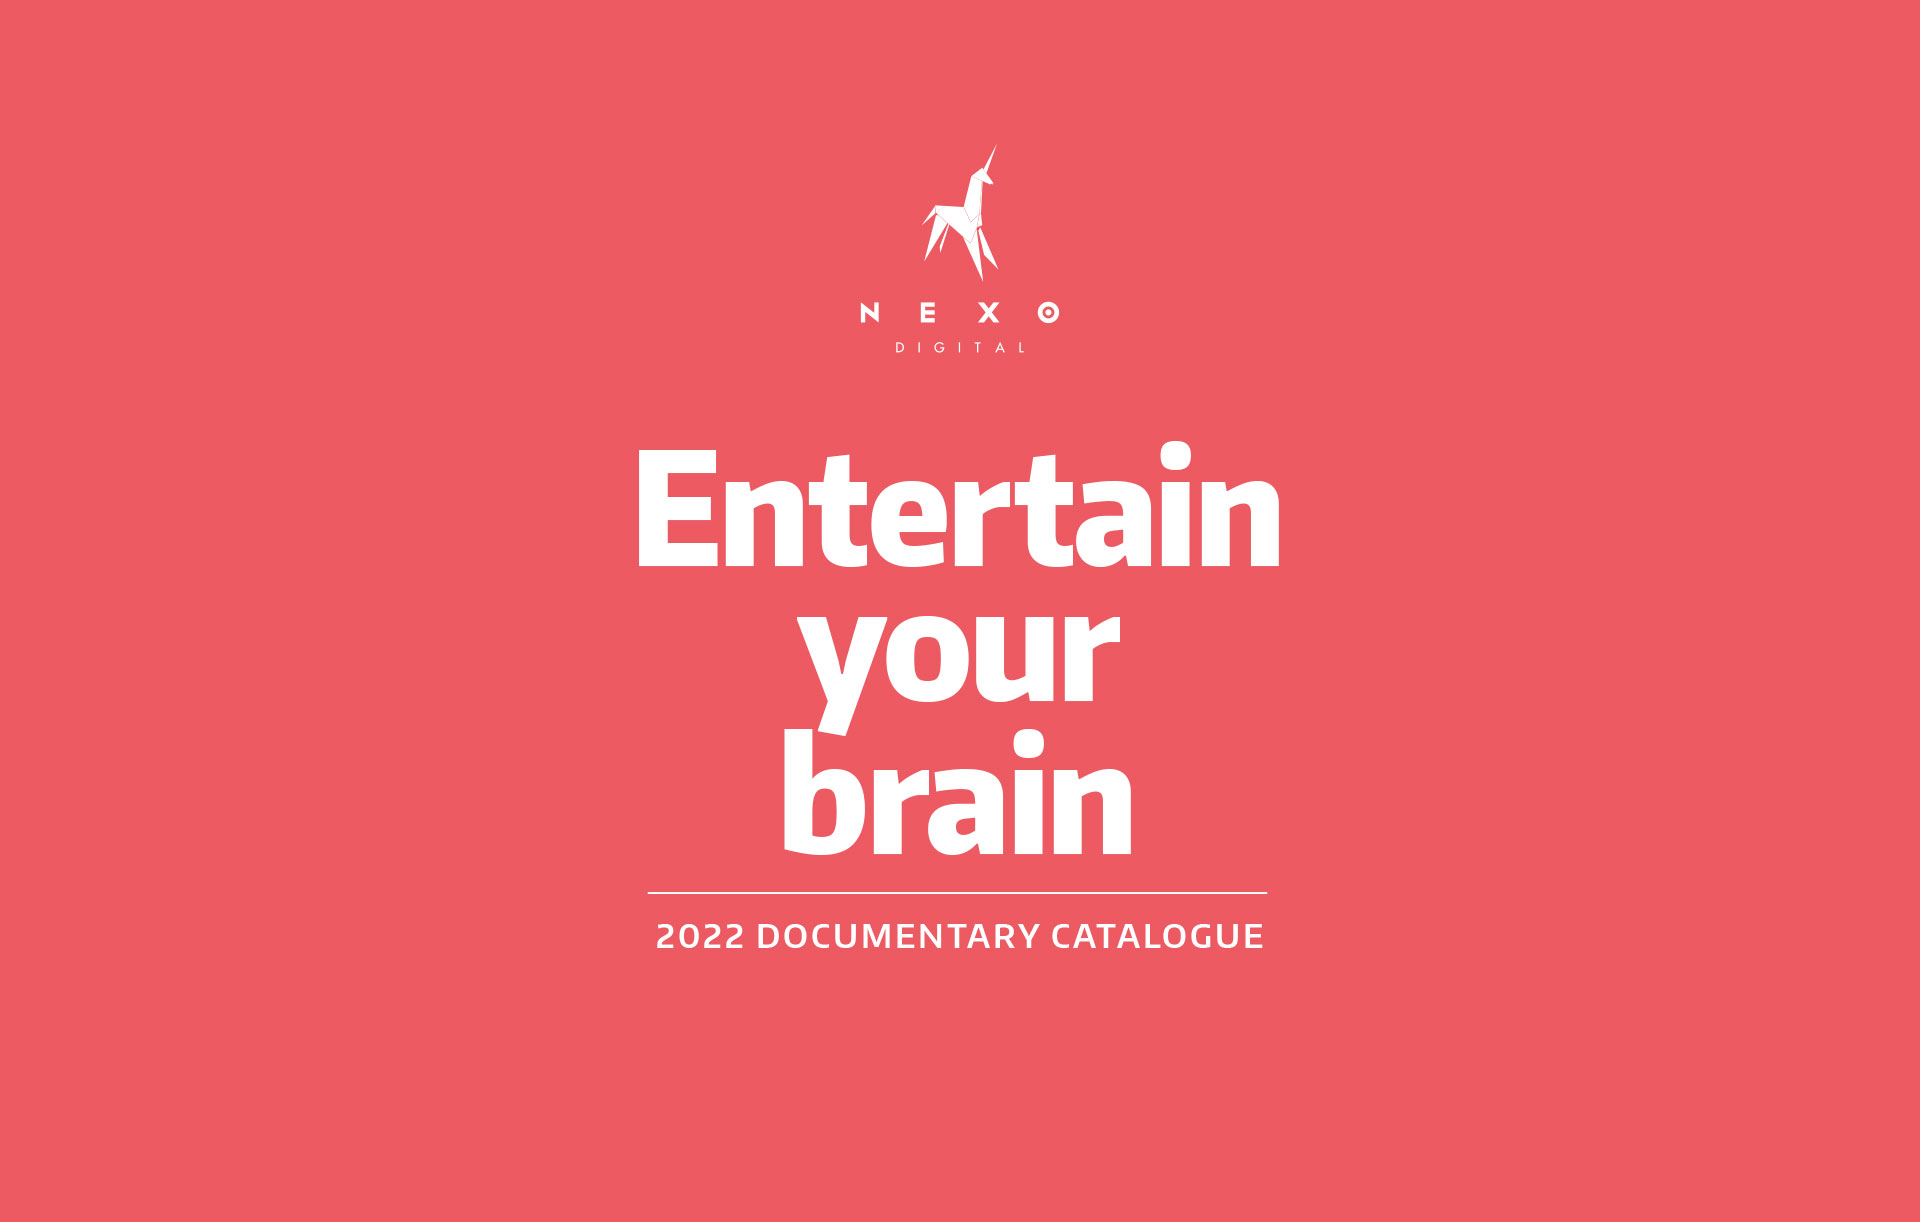 DOWNLOAD OUR DOCUMENTARY 2017/2022 CATALOGUE